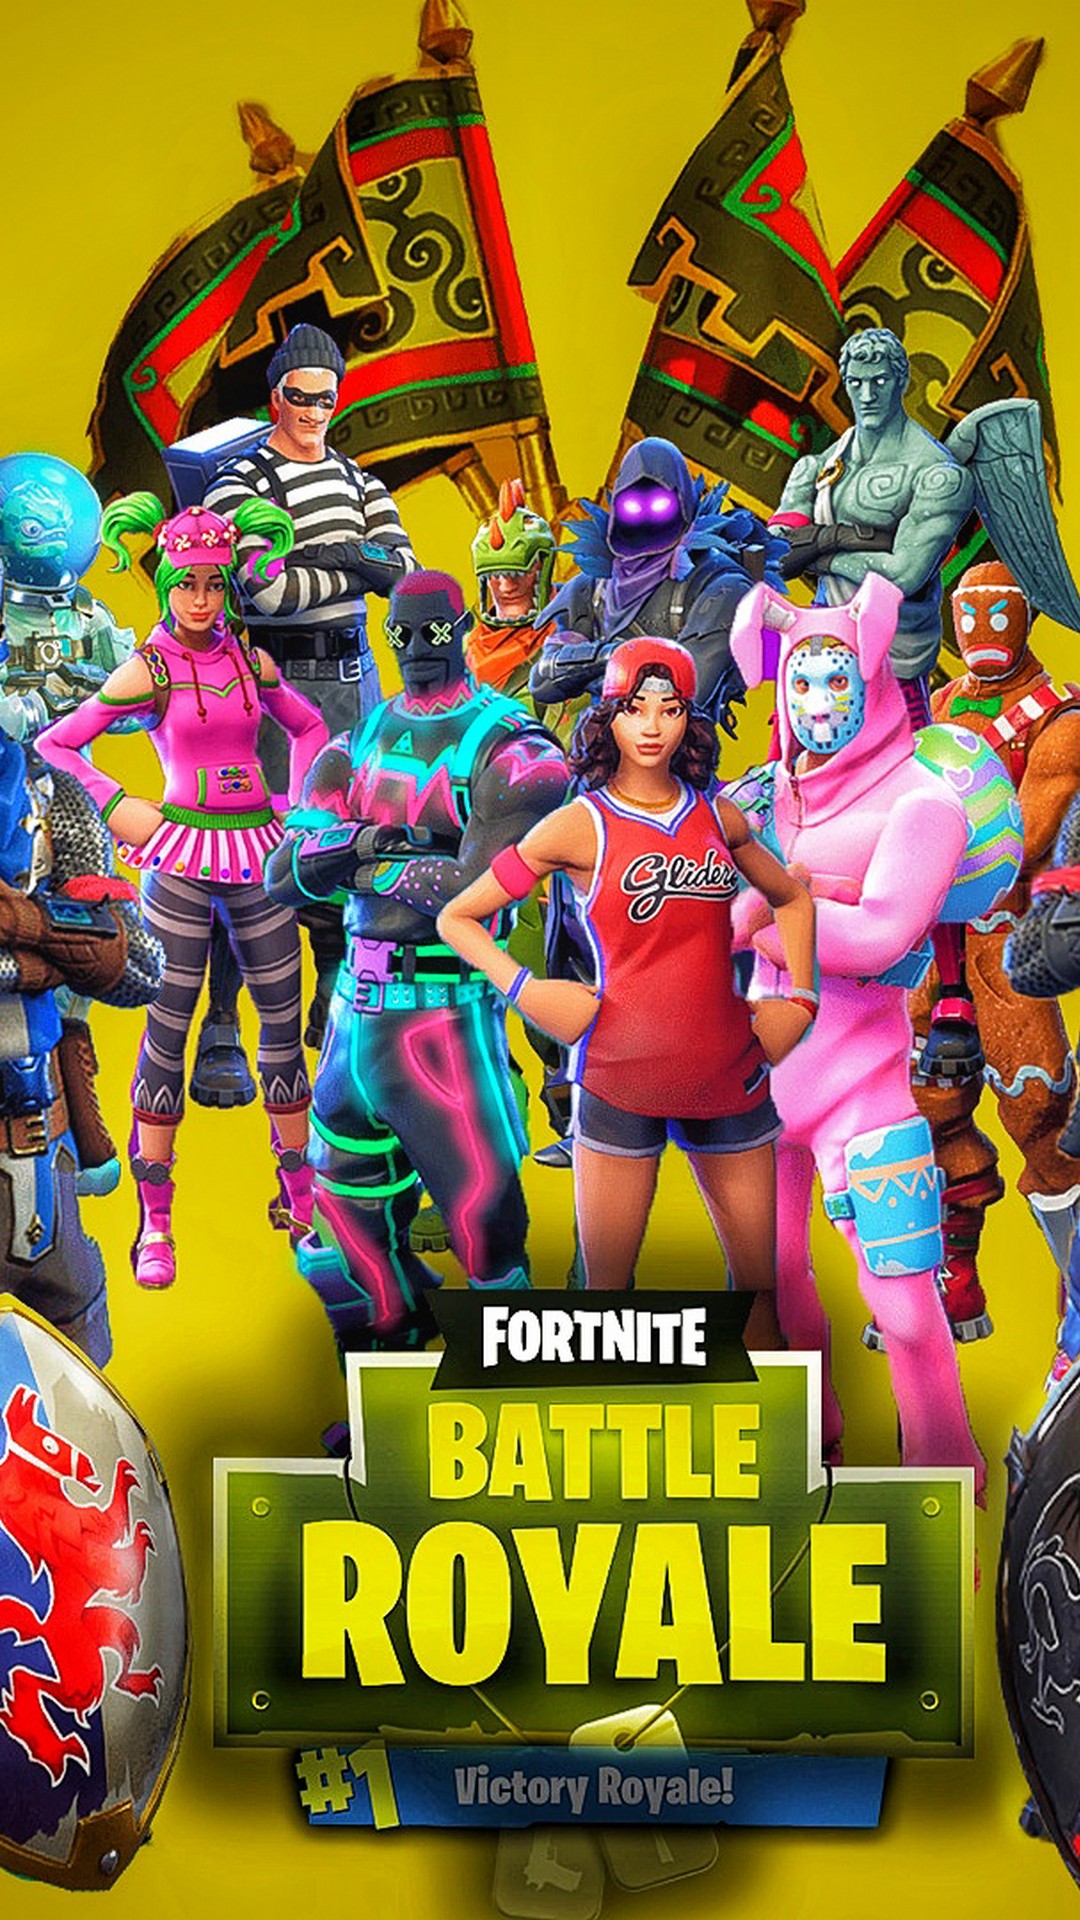 Fortnite Wallpaper iPhone With high-resolution 1080X1920 pixel. You can use this wallpaper for your iPhone 5, 6, 7, 8, X, XS, XR backgrounds, Mobile Screensaver, or iPad Lock Screen